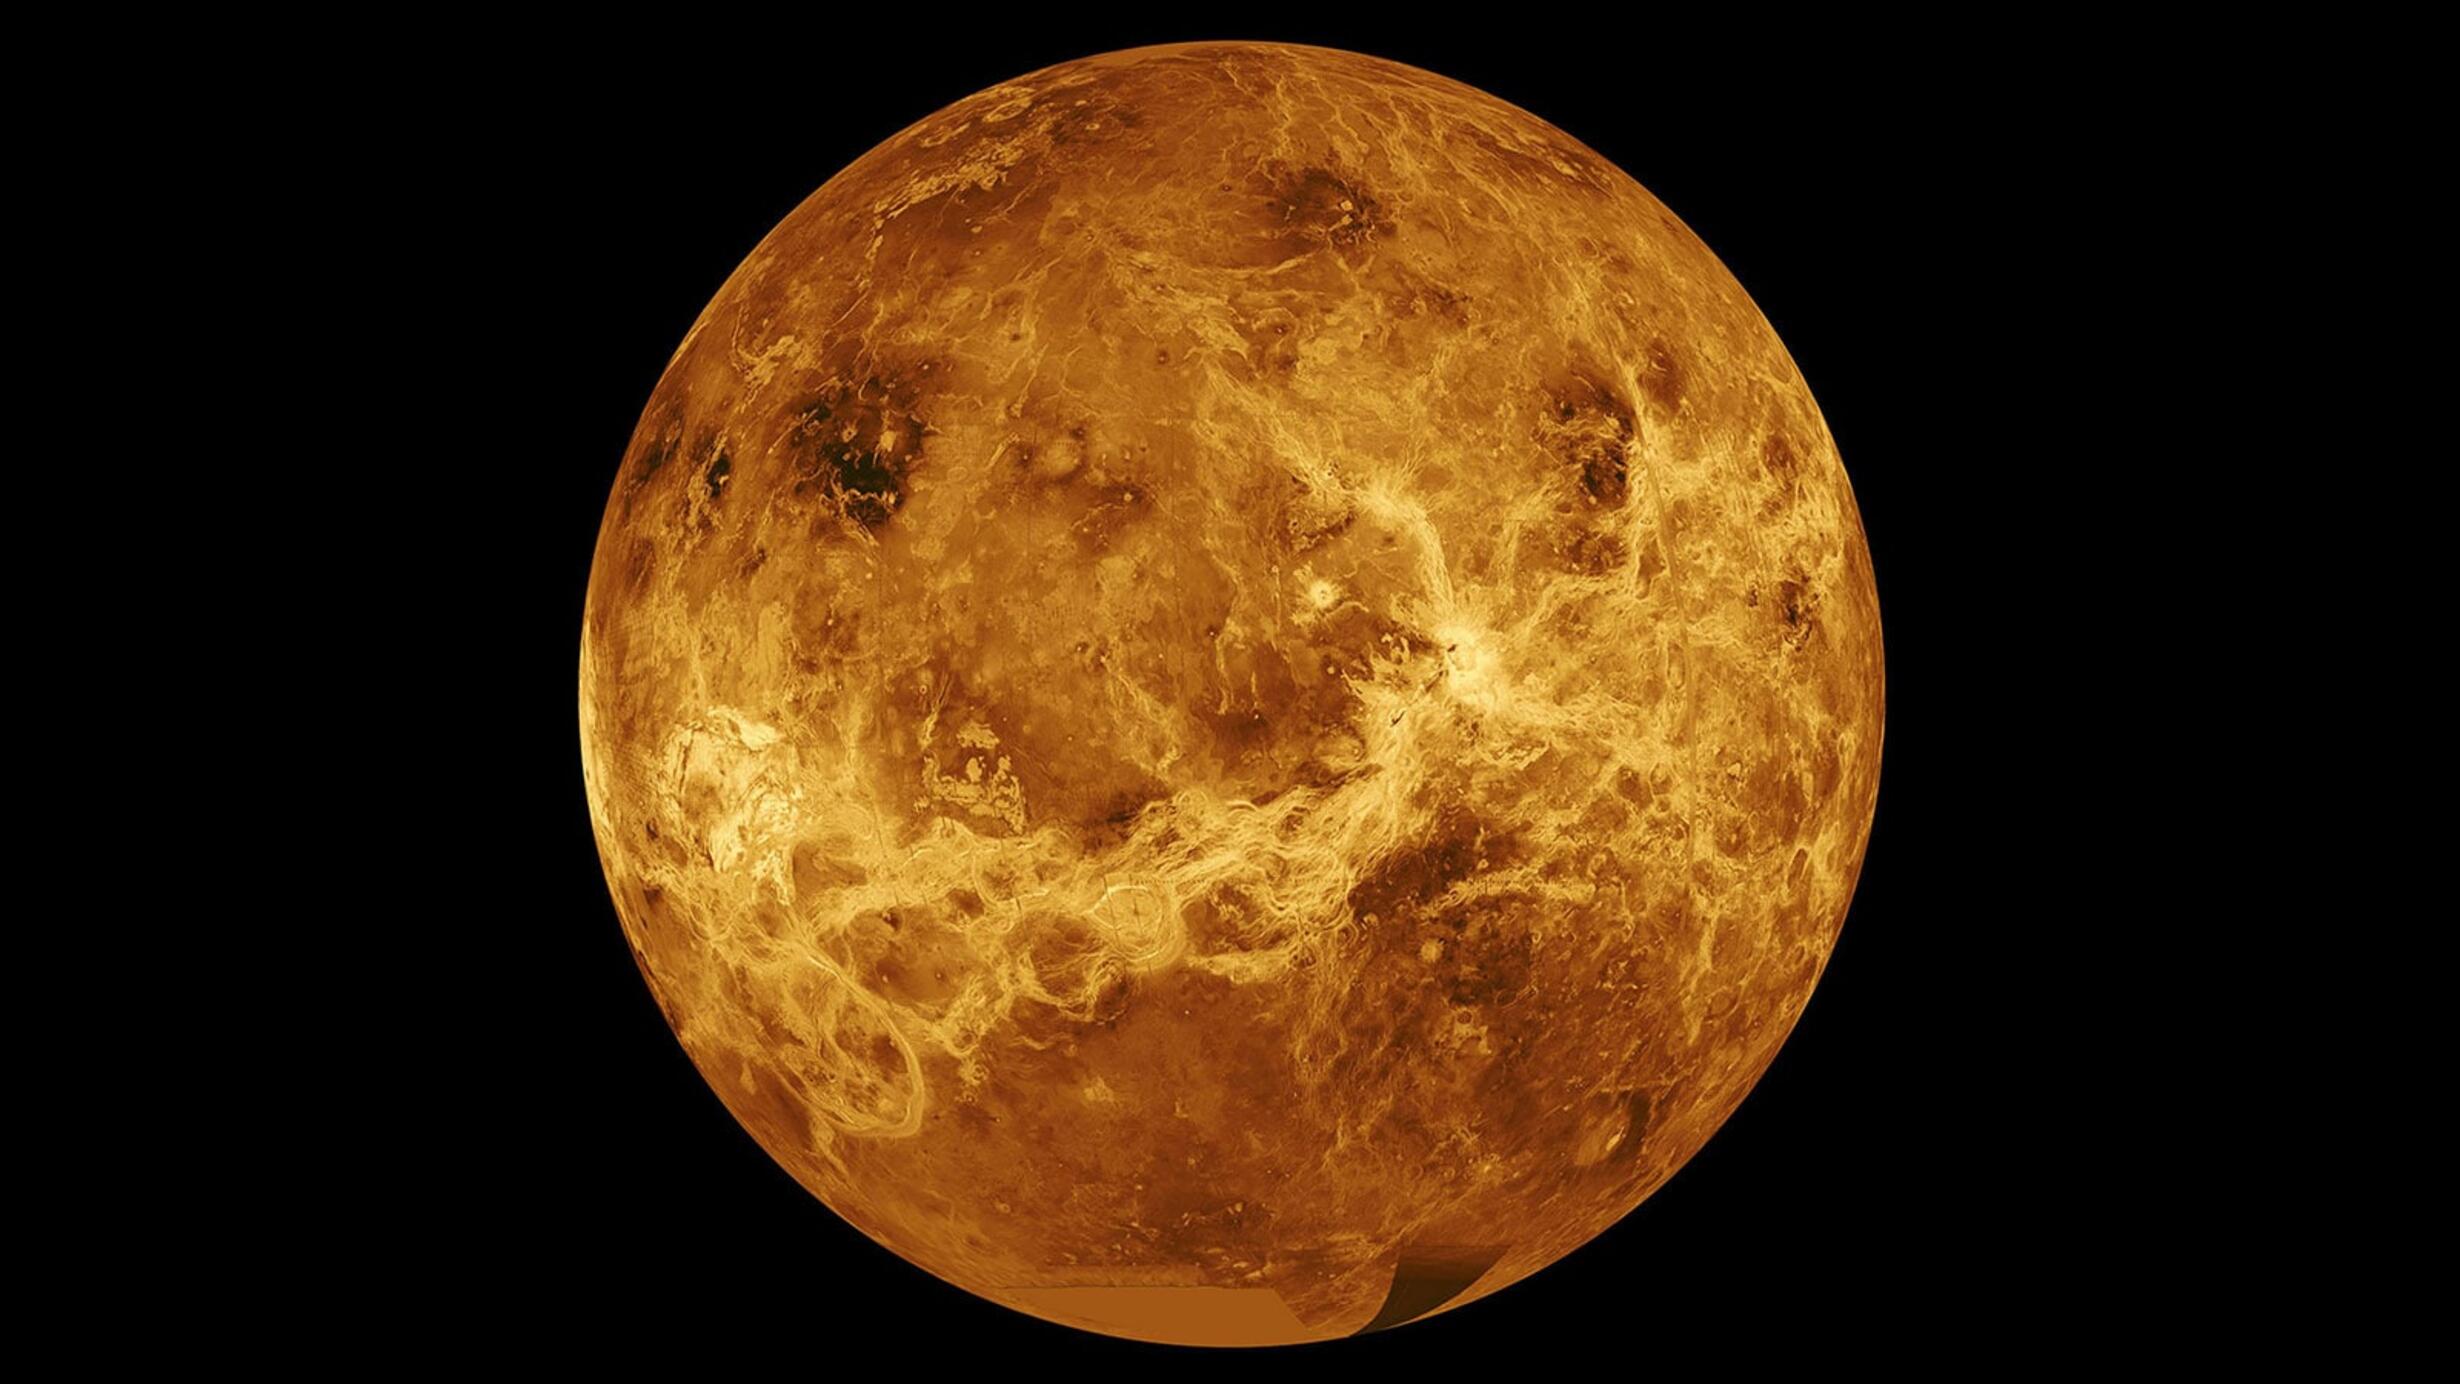 A depiction of the planet Venus, in rich geographic detail, made up of images compiled from past NASA missions to map the planet's surface.